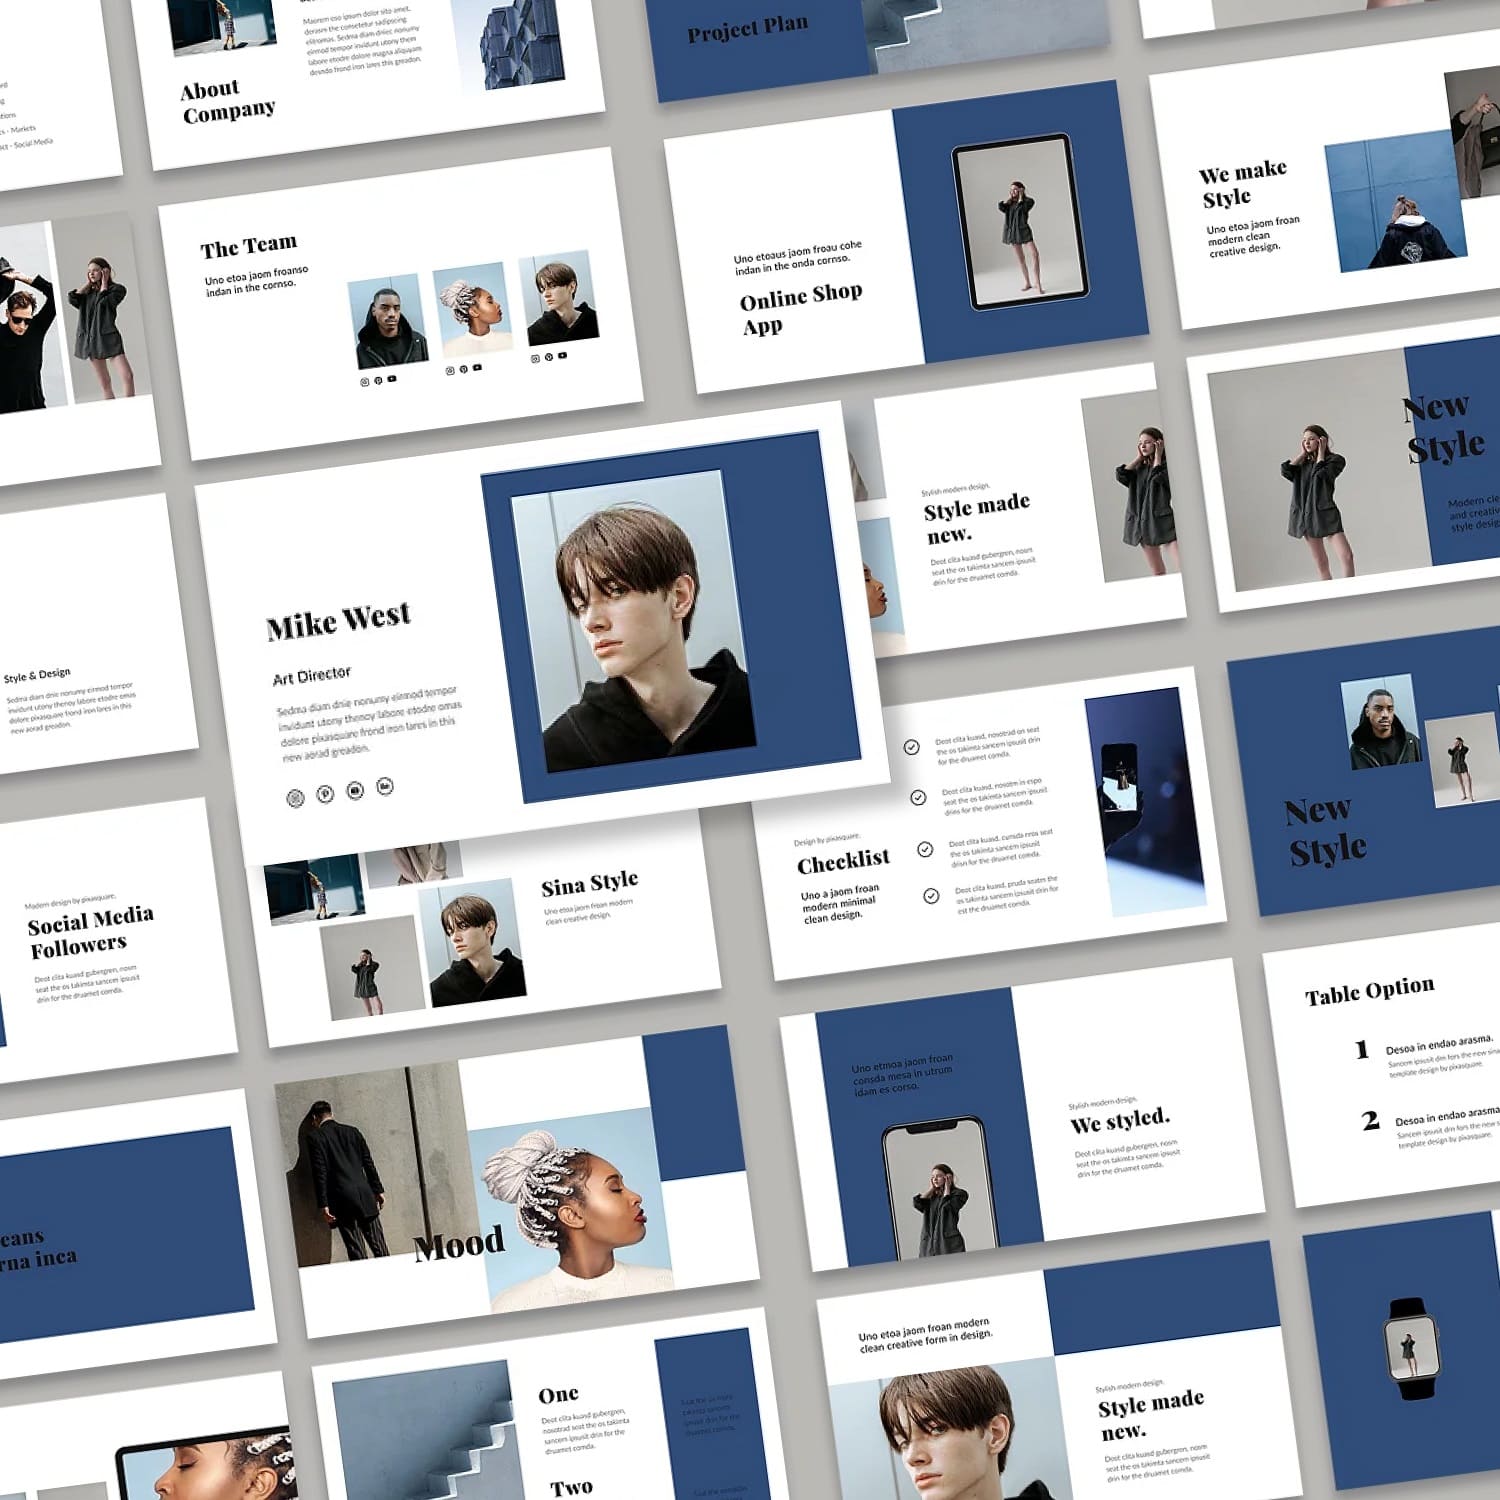 Sina Keynote Style Template Slides 1500 by 1500 pixels: About Company, Project Plan, The Team, Online Shop App.